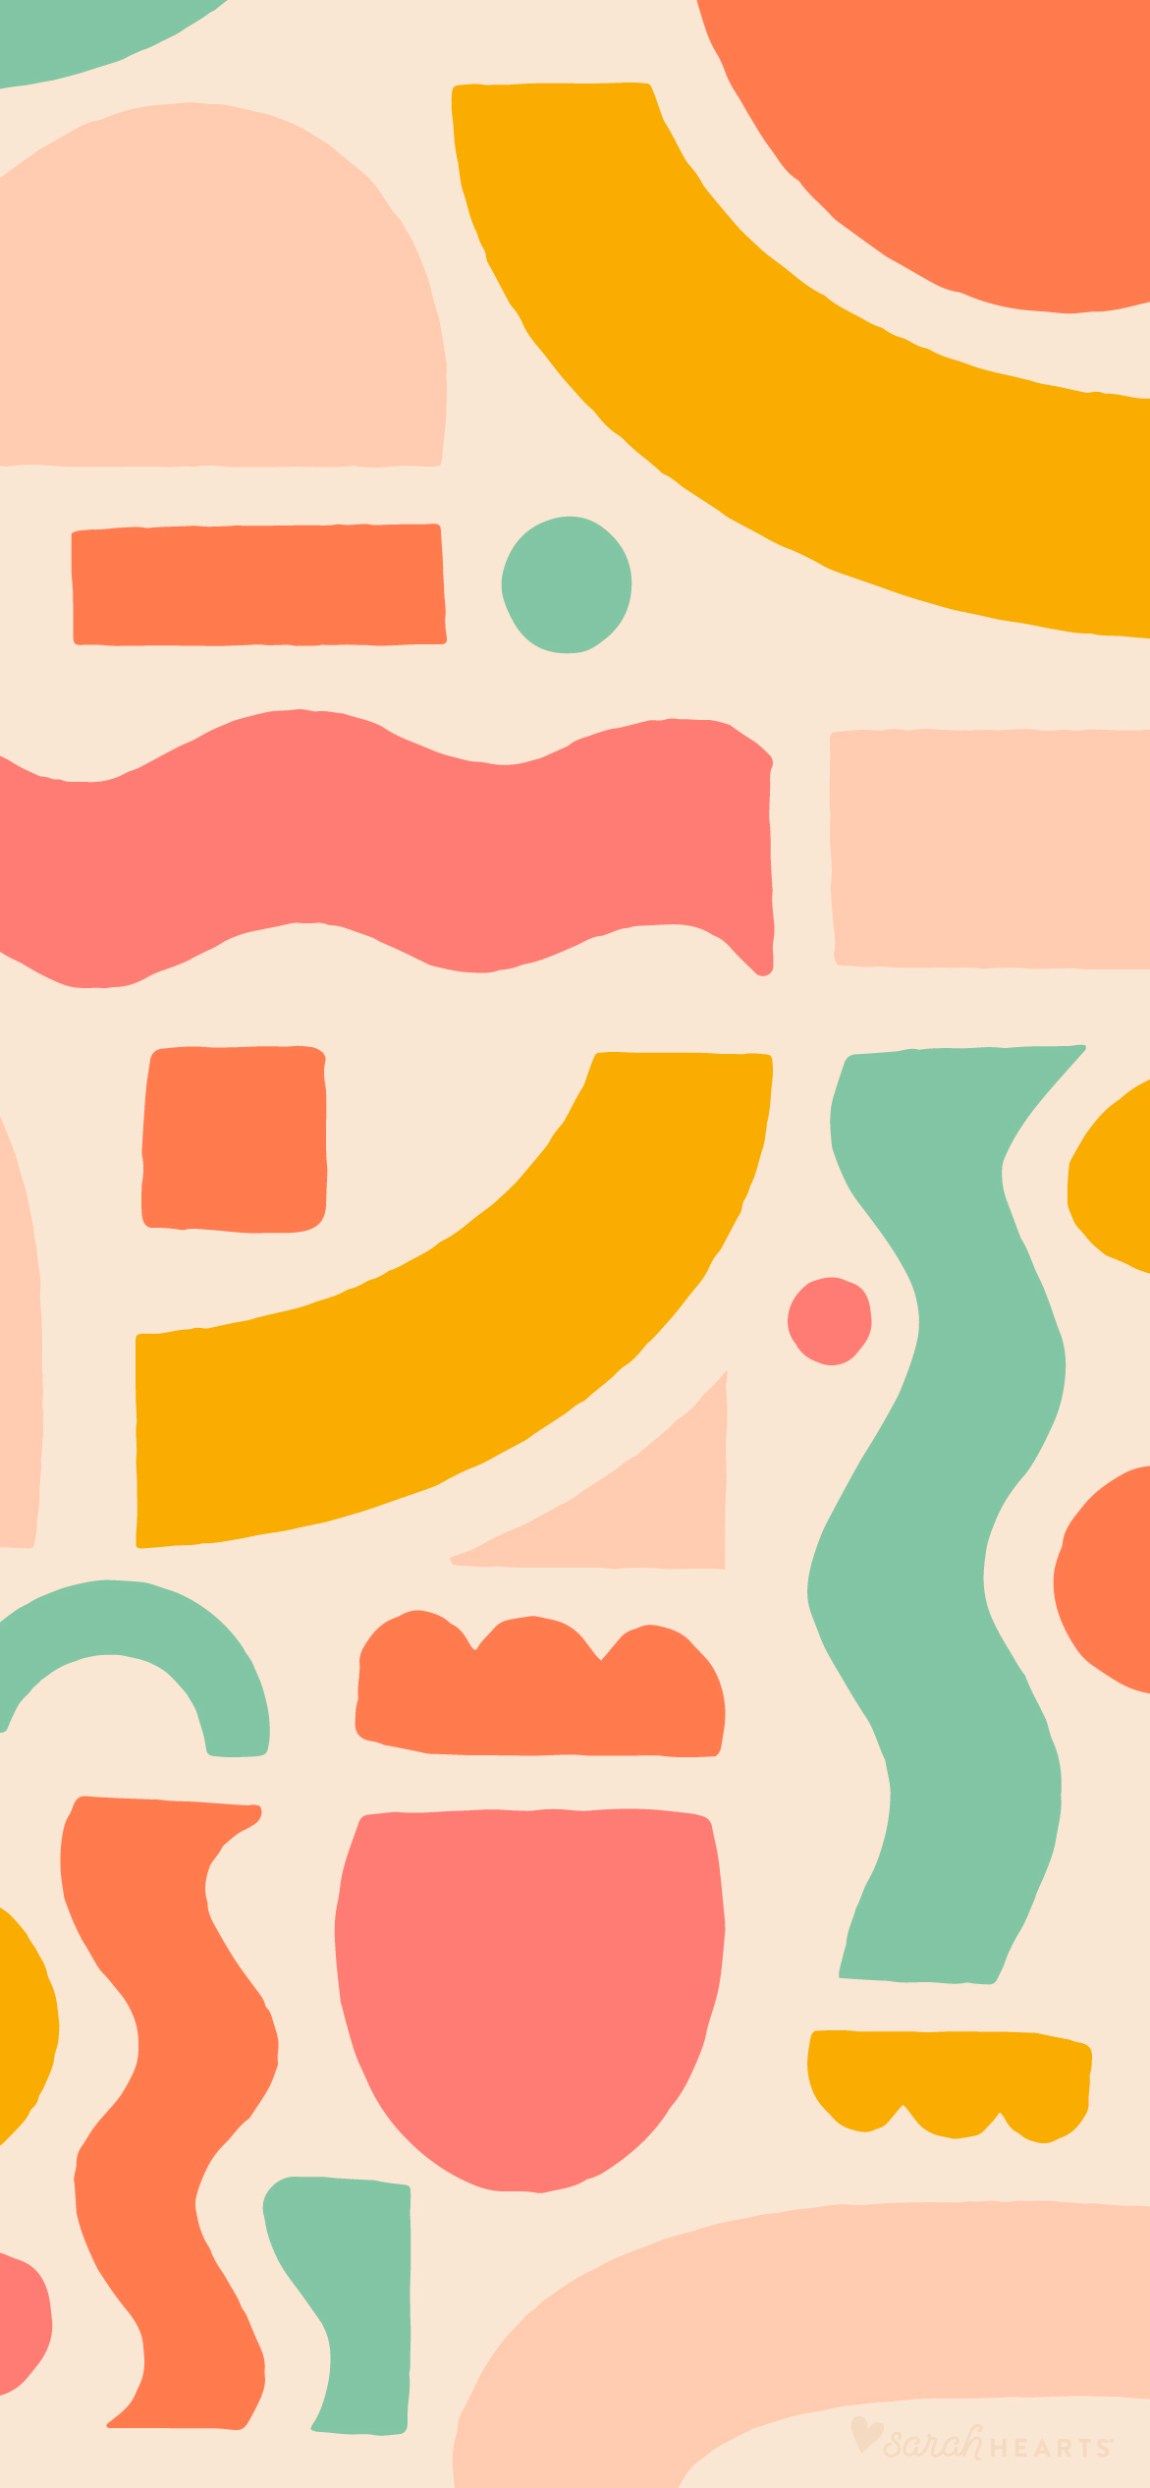 A colorful pattern of shapes and lines - Colorful, August, pizza, July